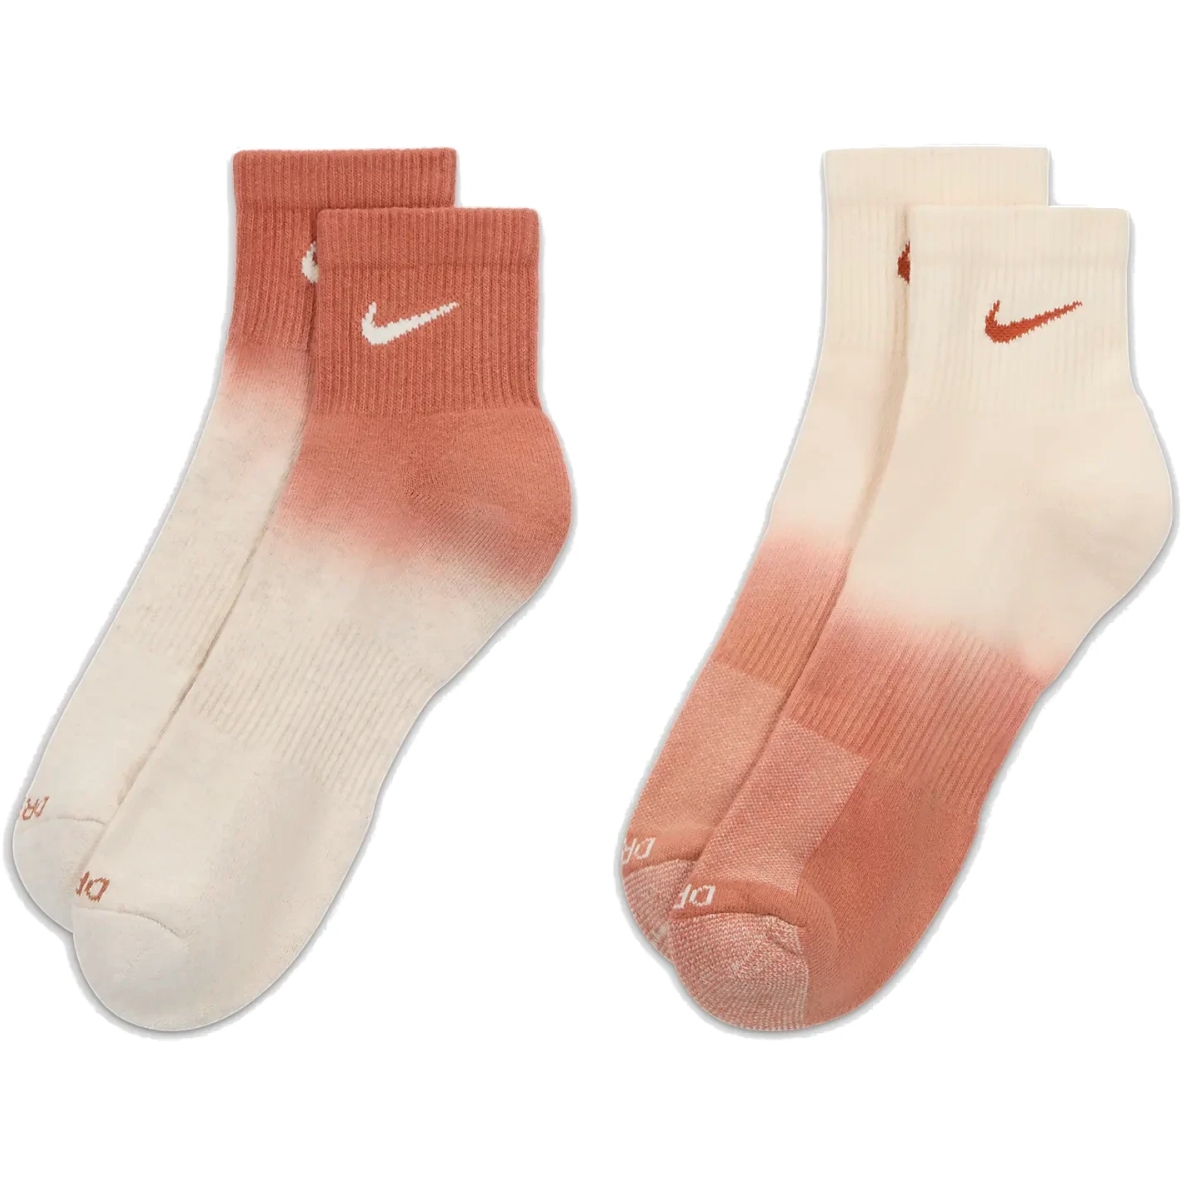 Picture of Nike Everyday Plus Cushioned Ankle Socks - 2 Pair - multi-color FJ4913-907